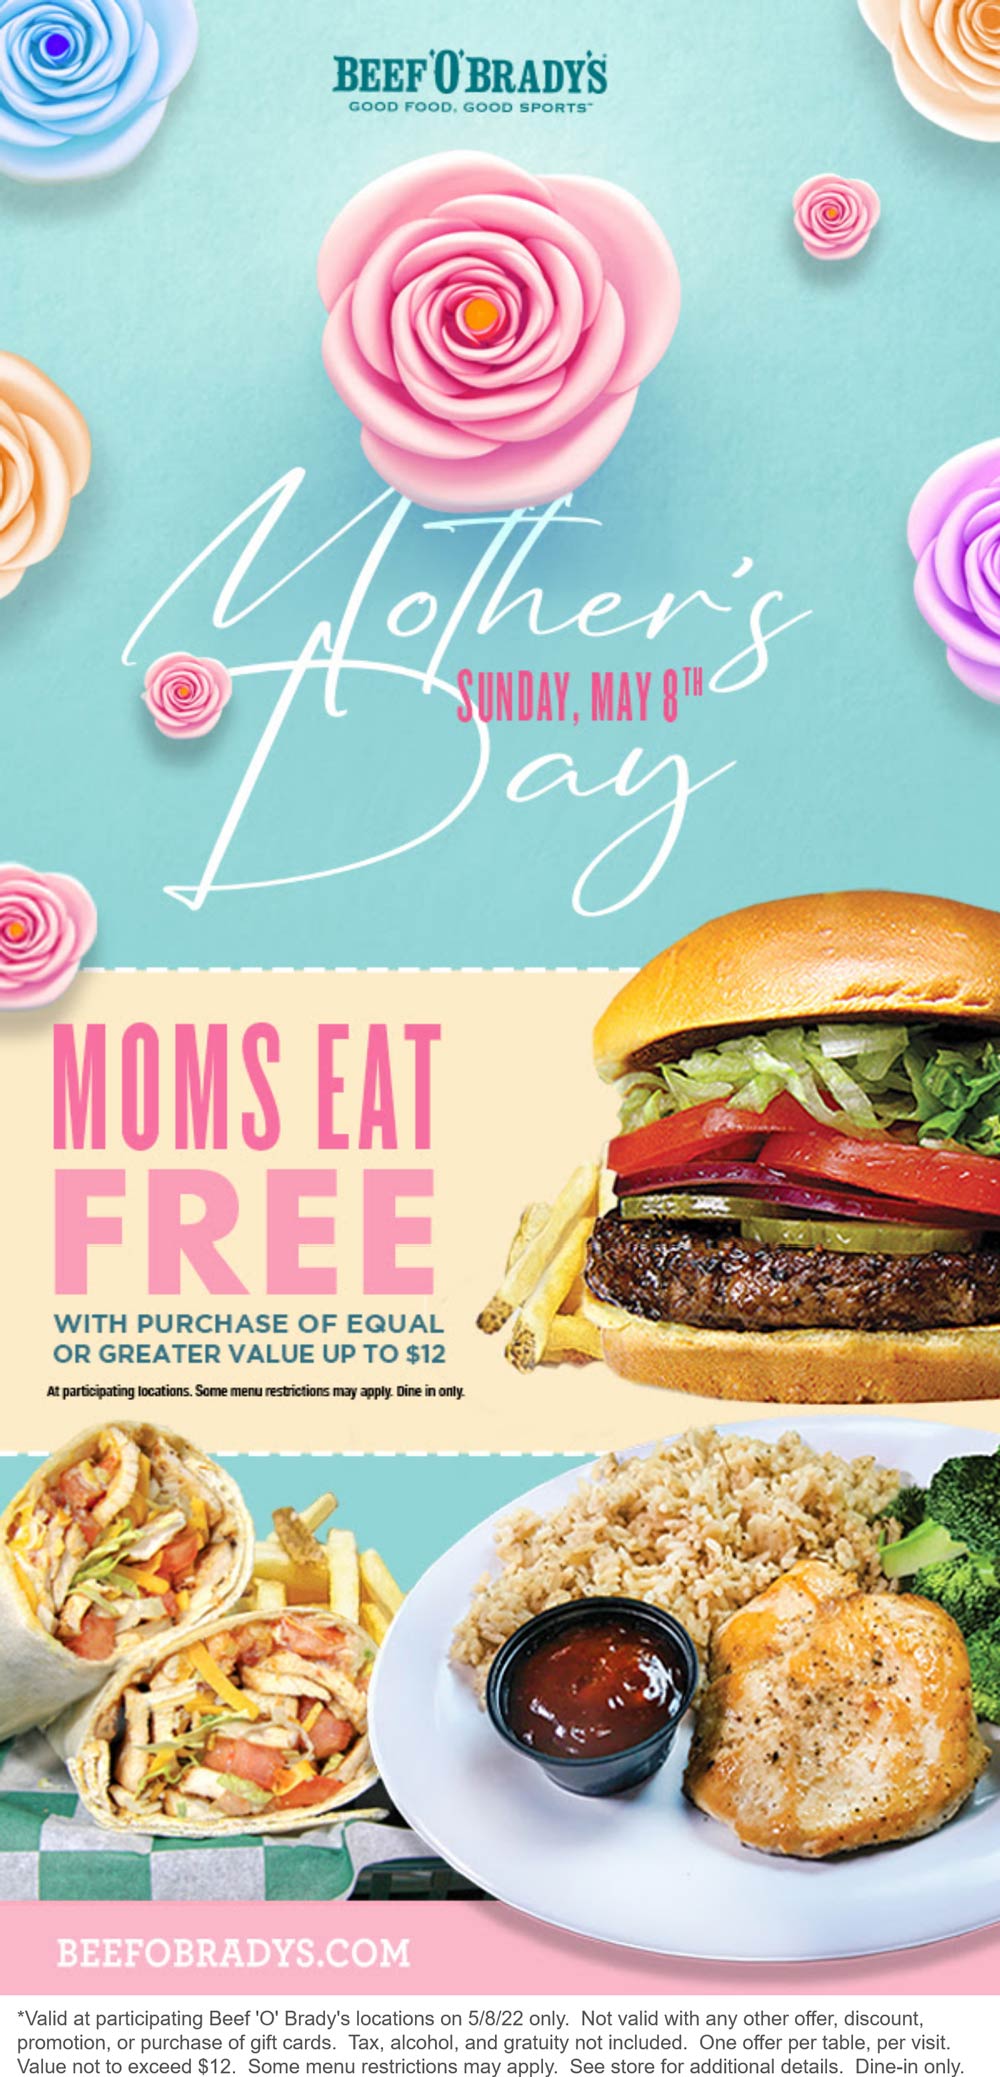 Beef OBradys restaurants Coupon  Mom eats free with your meal Sunday at Beef OBradys #beefobradys 